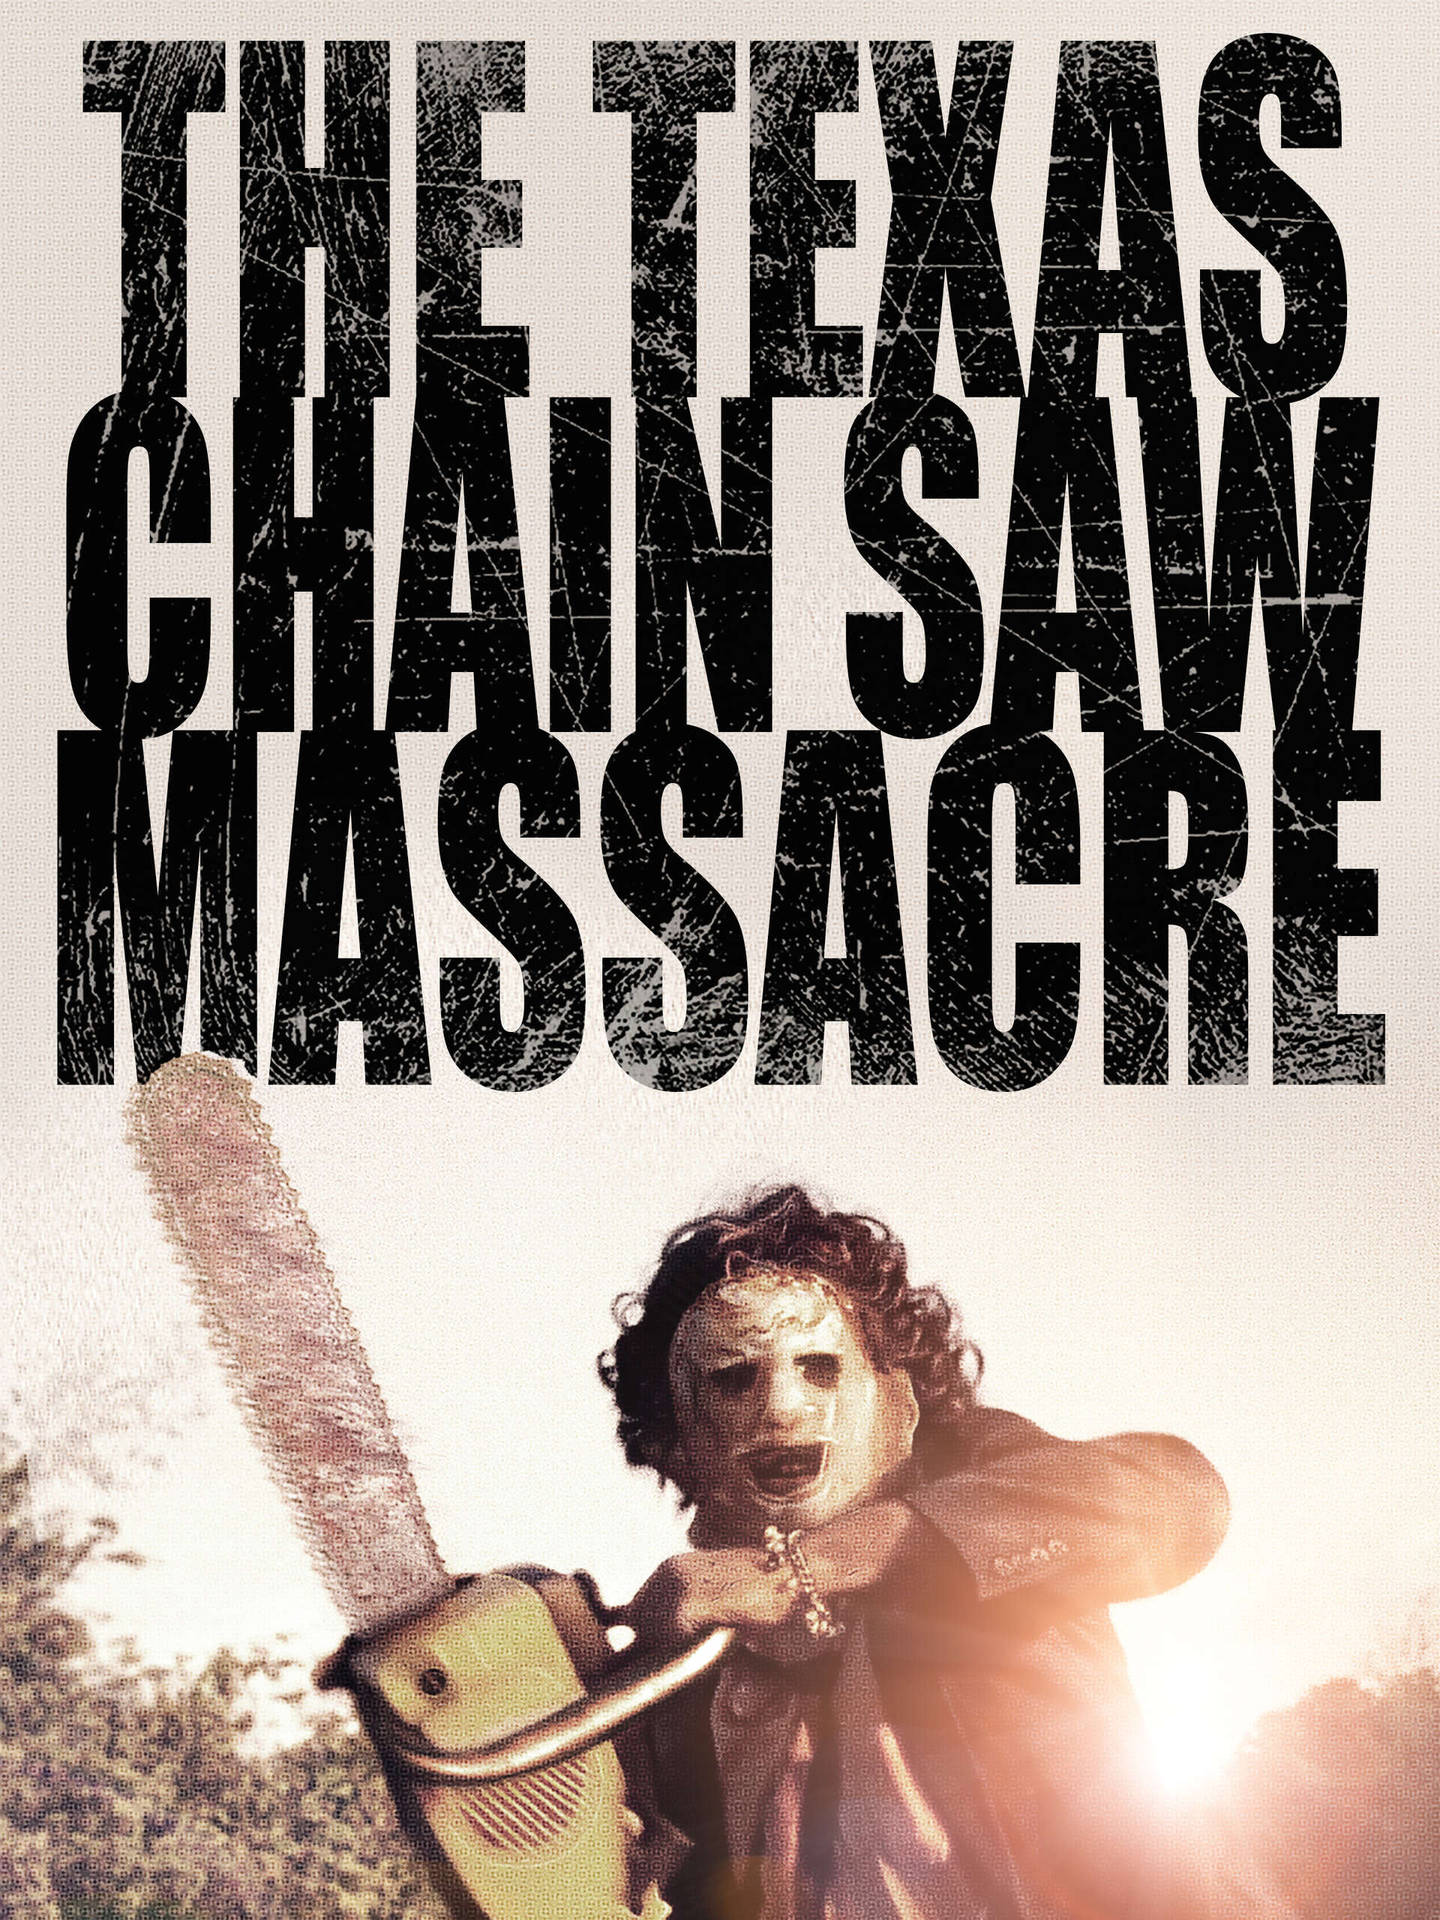 Leatherface Texas Chainsaw Massacre Poster